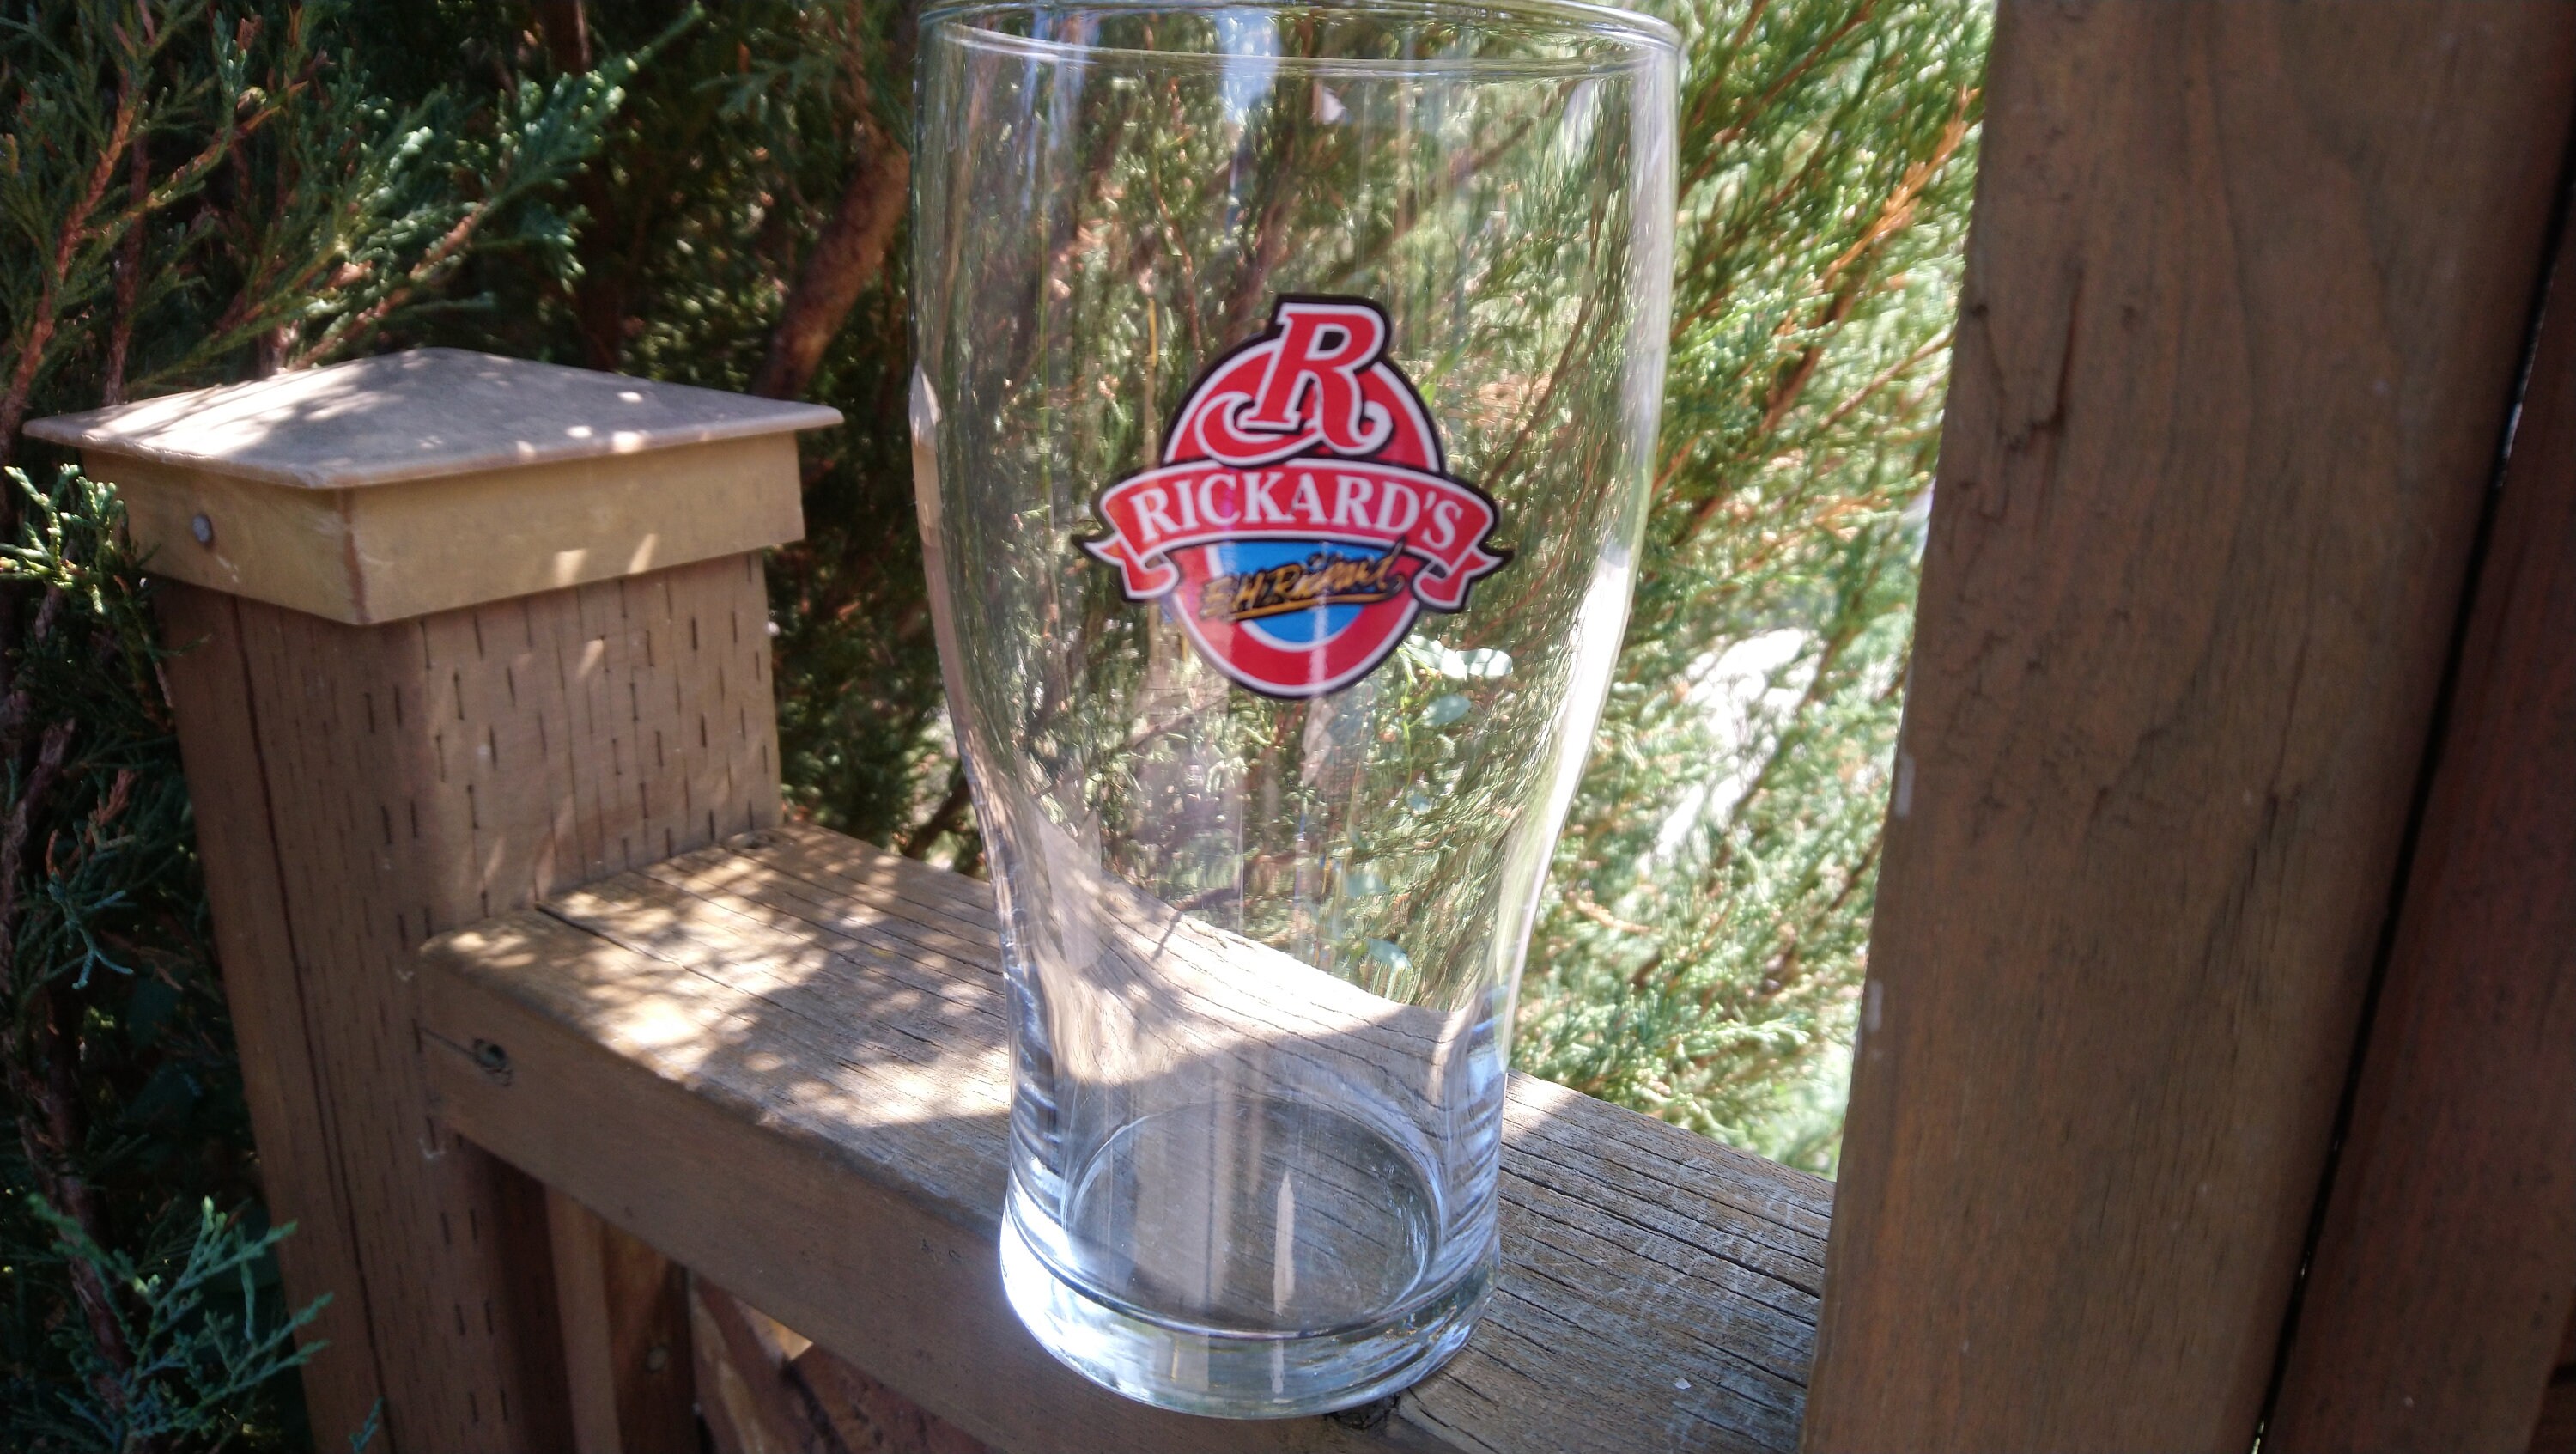 Rickard's Collectible Barware Glass Vintage Beer Glass Drinking Glass Red Blue Label Ricard's Red Glass Owned By Molson Coors Canada